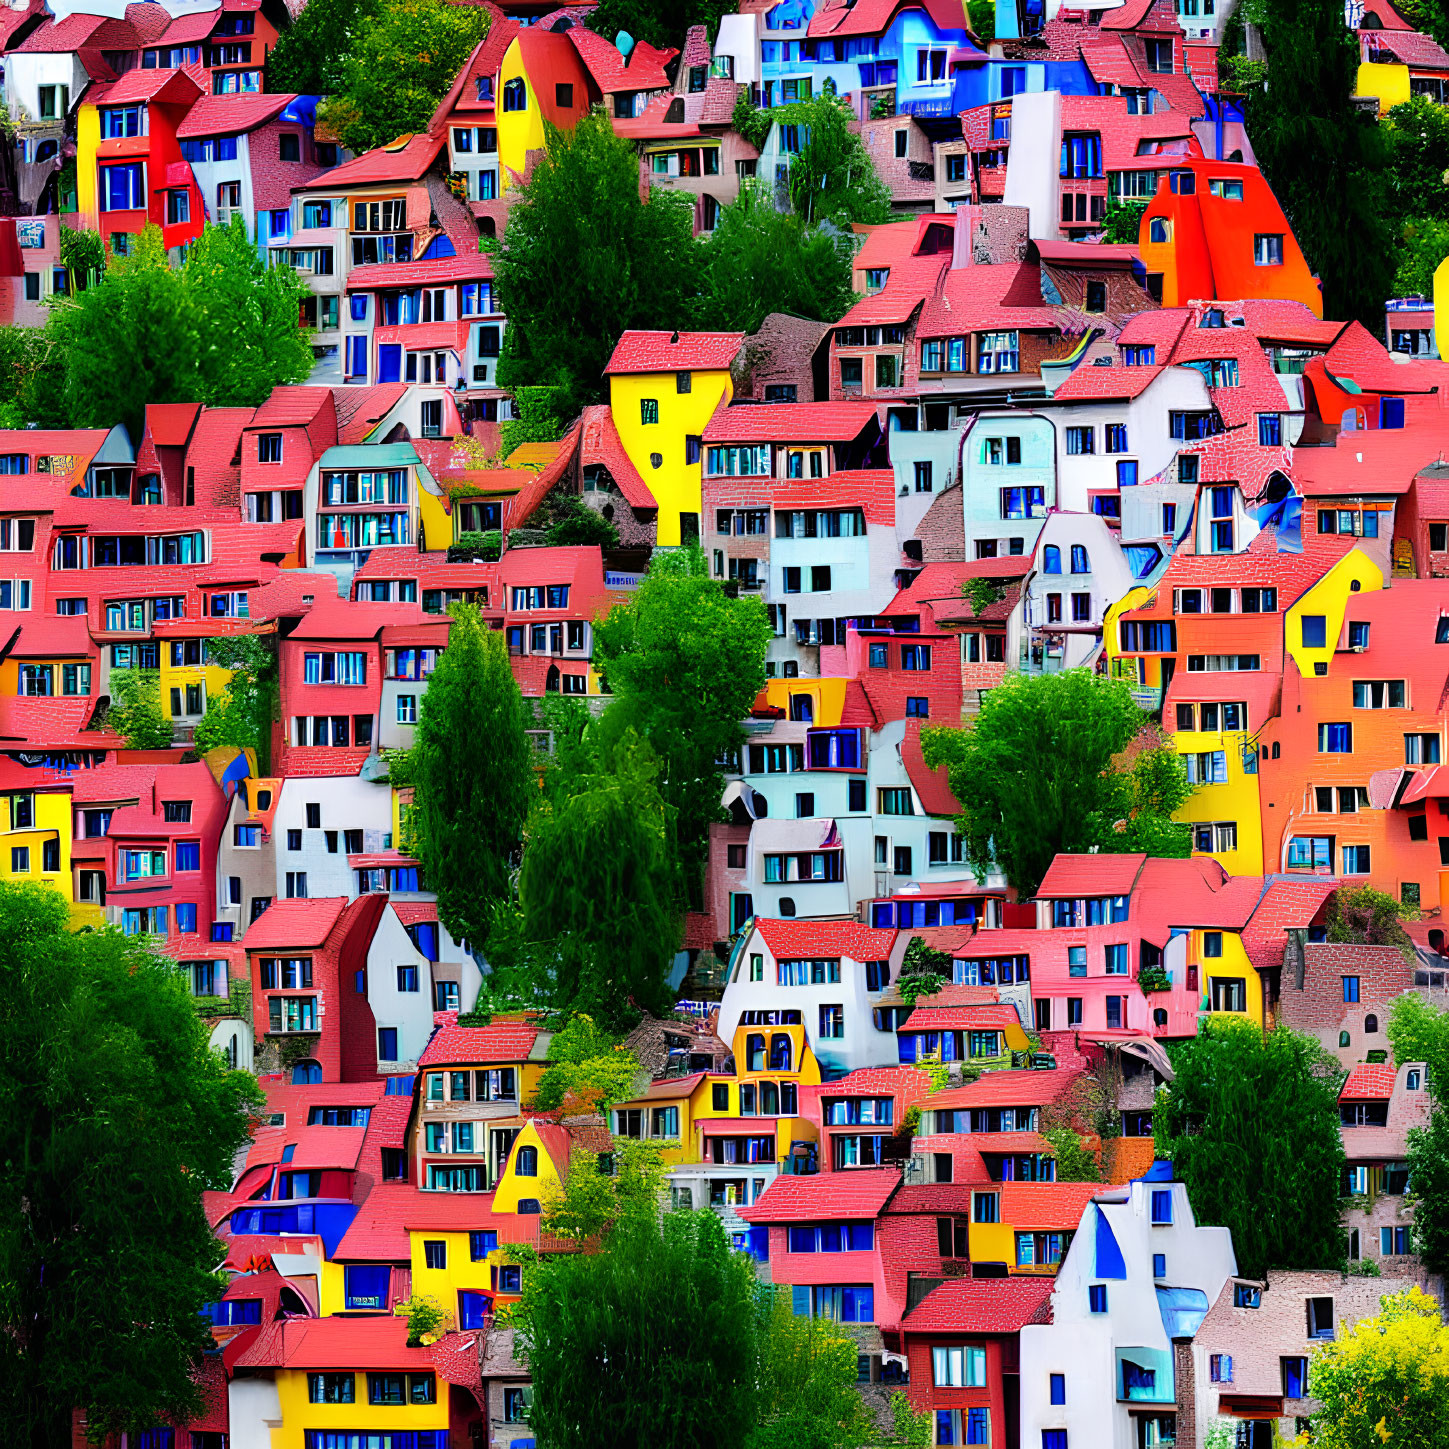 Vibrant hillside with colorful houses and red roofs nestled in greenery